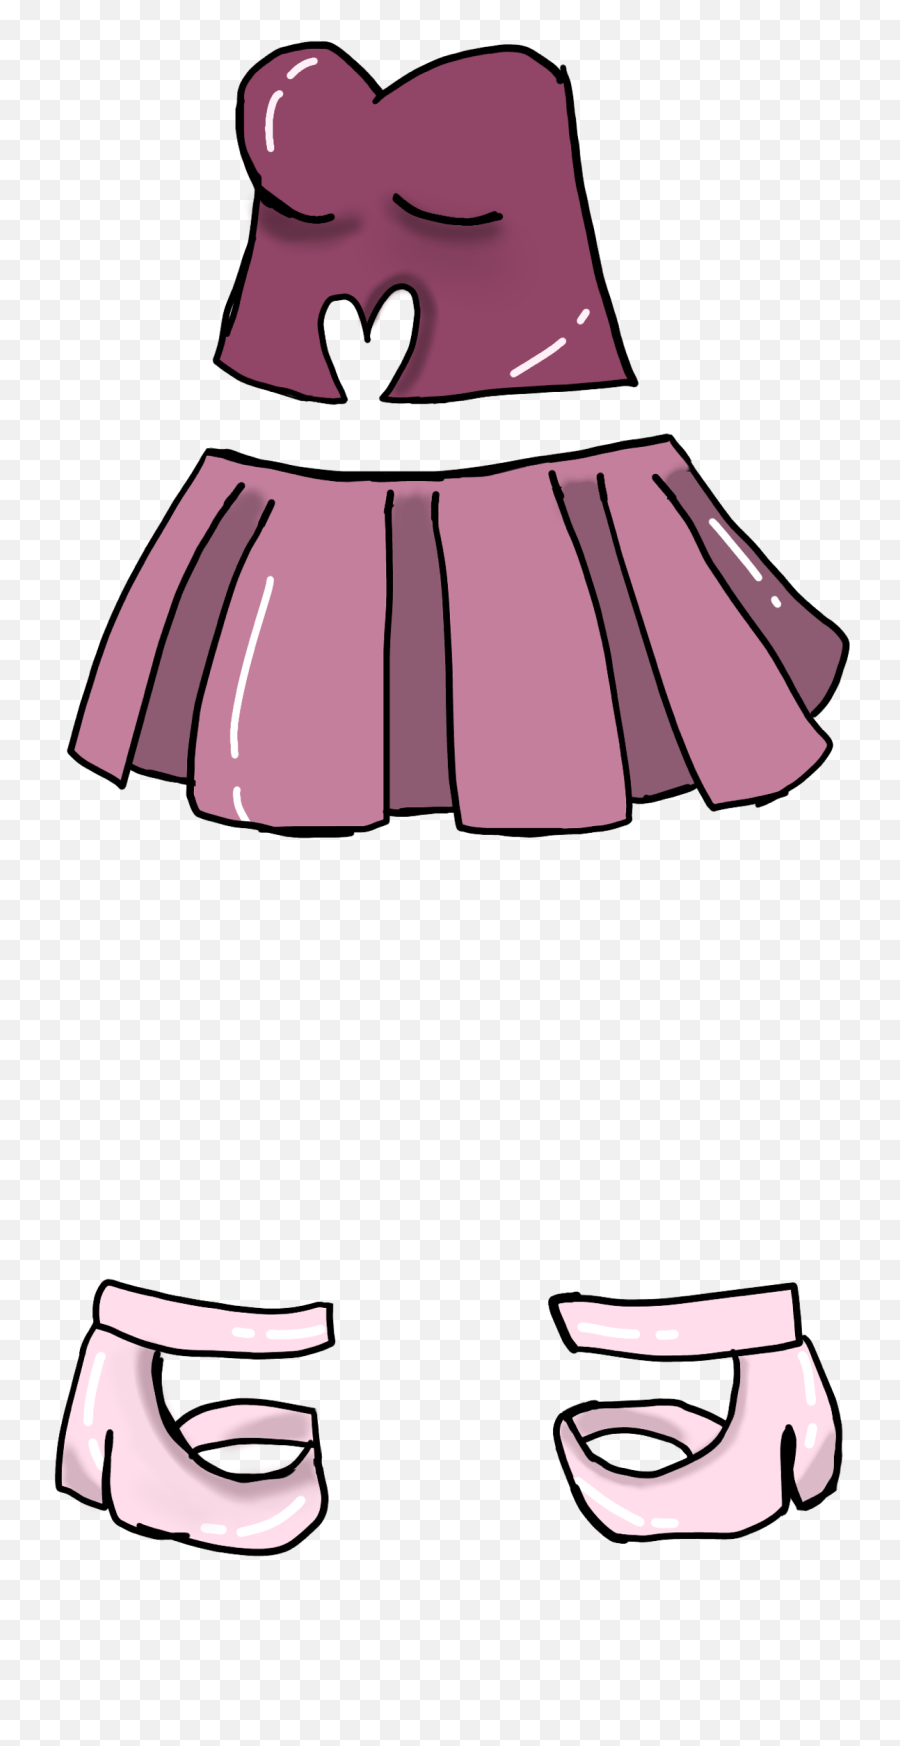 Gachalife Outfit Drawing Sticker - Girly Emoji,Emoji Outfit For Guys